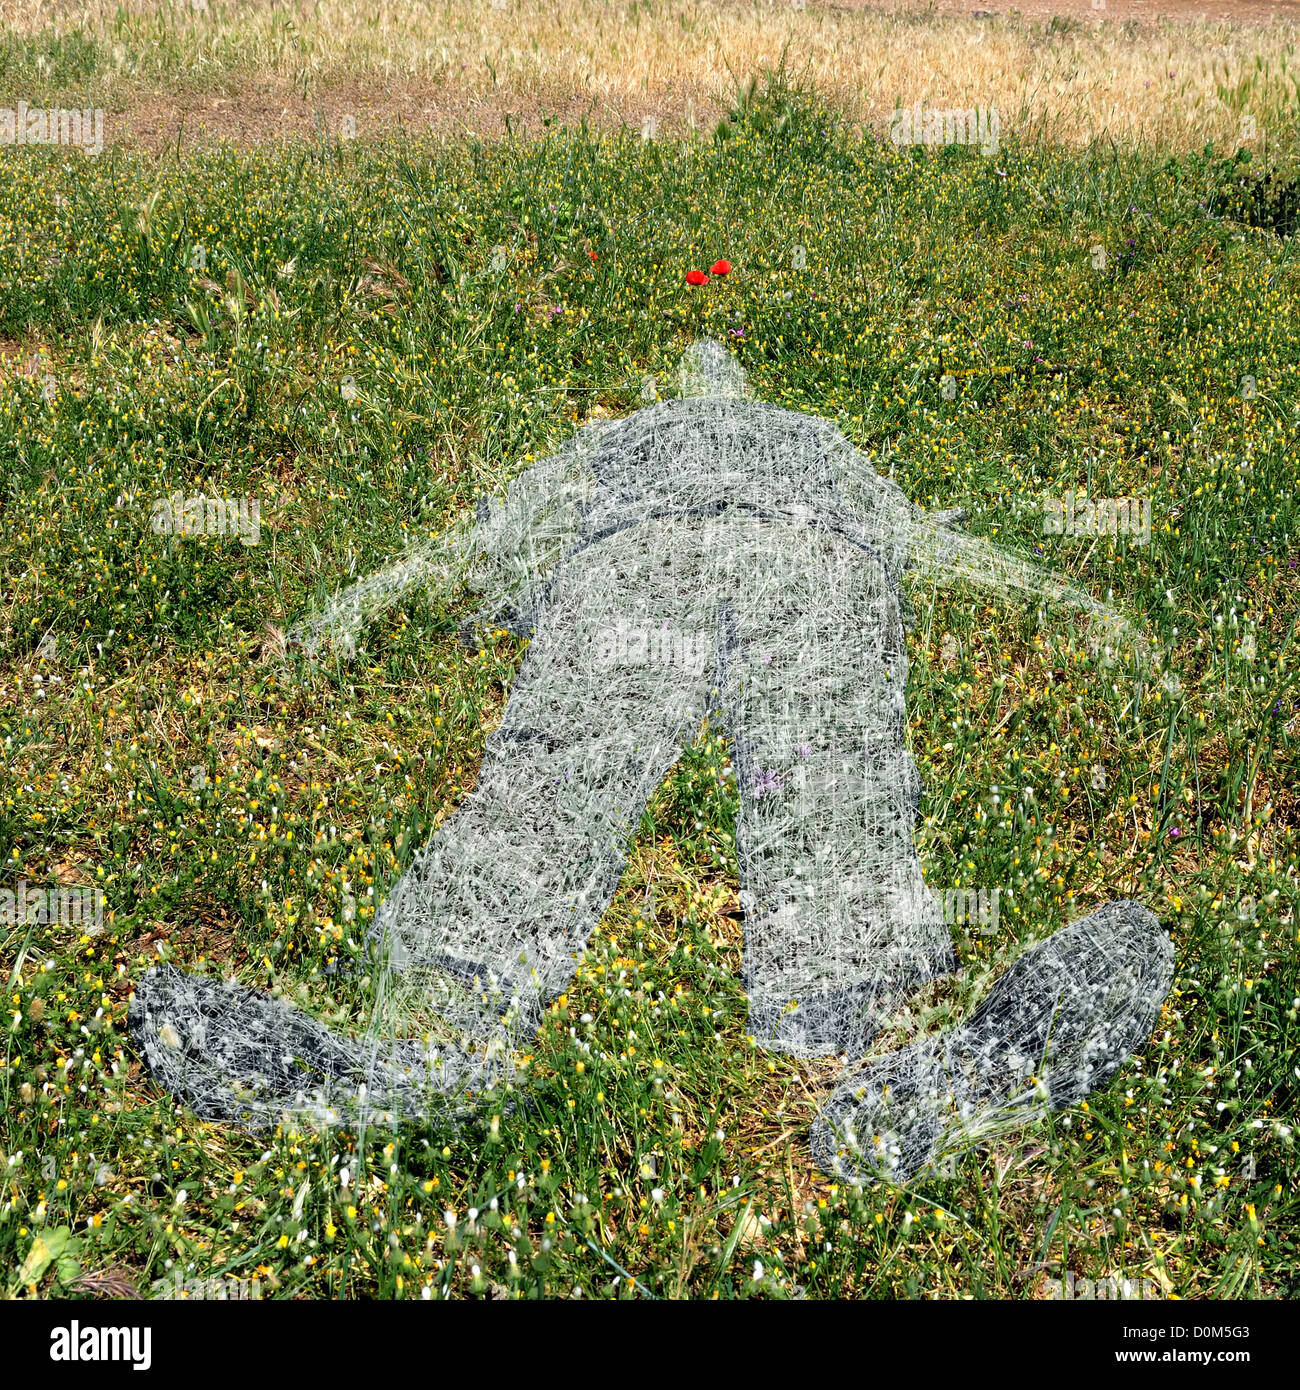 Withered grass ghostlike human figure imprint on green field. Stock Photo